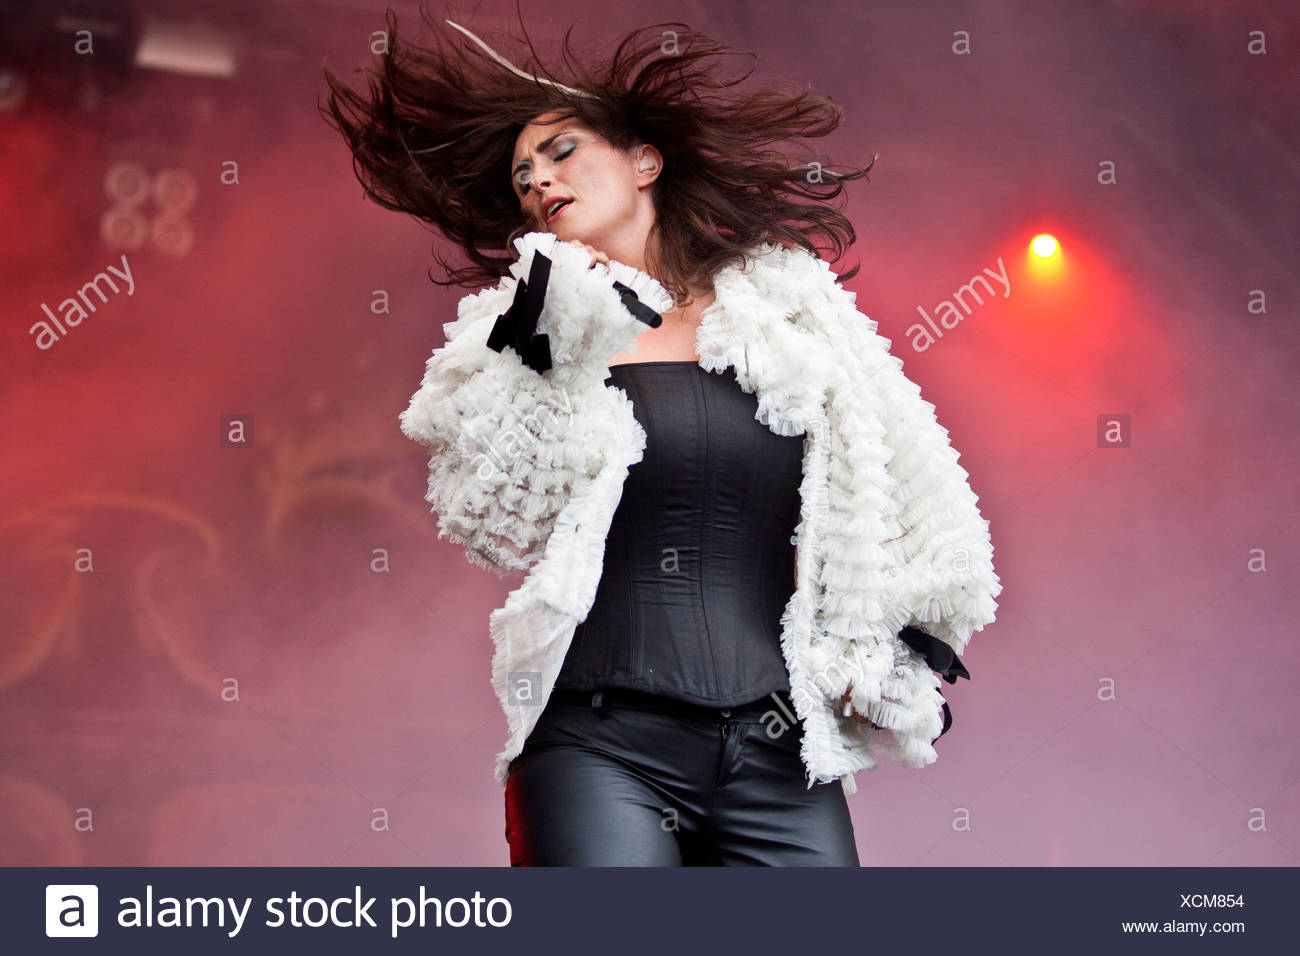 Singer And Frontwoman Sharon Den Adel Of The Dutch Symphonic Metal Band Within Temptation Performing Live At The Heitere Open Stock Photo Alamy